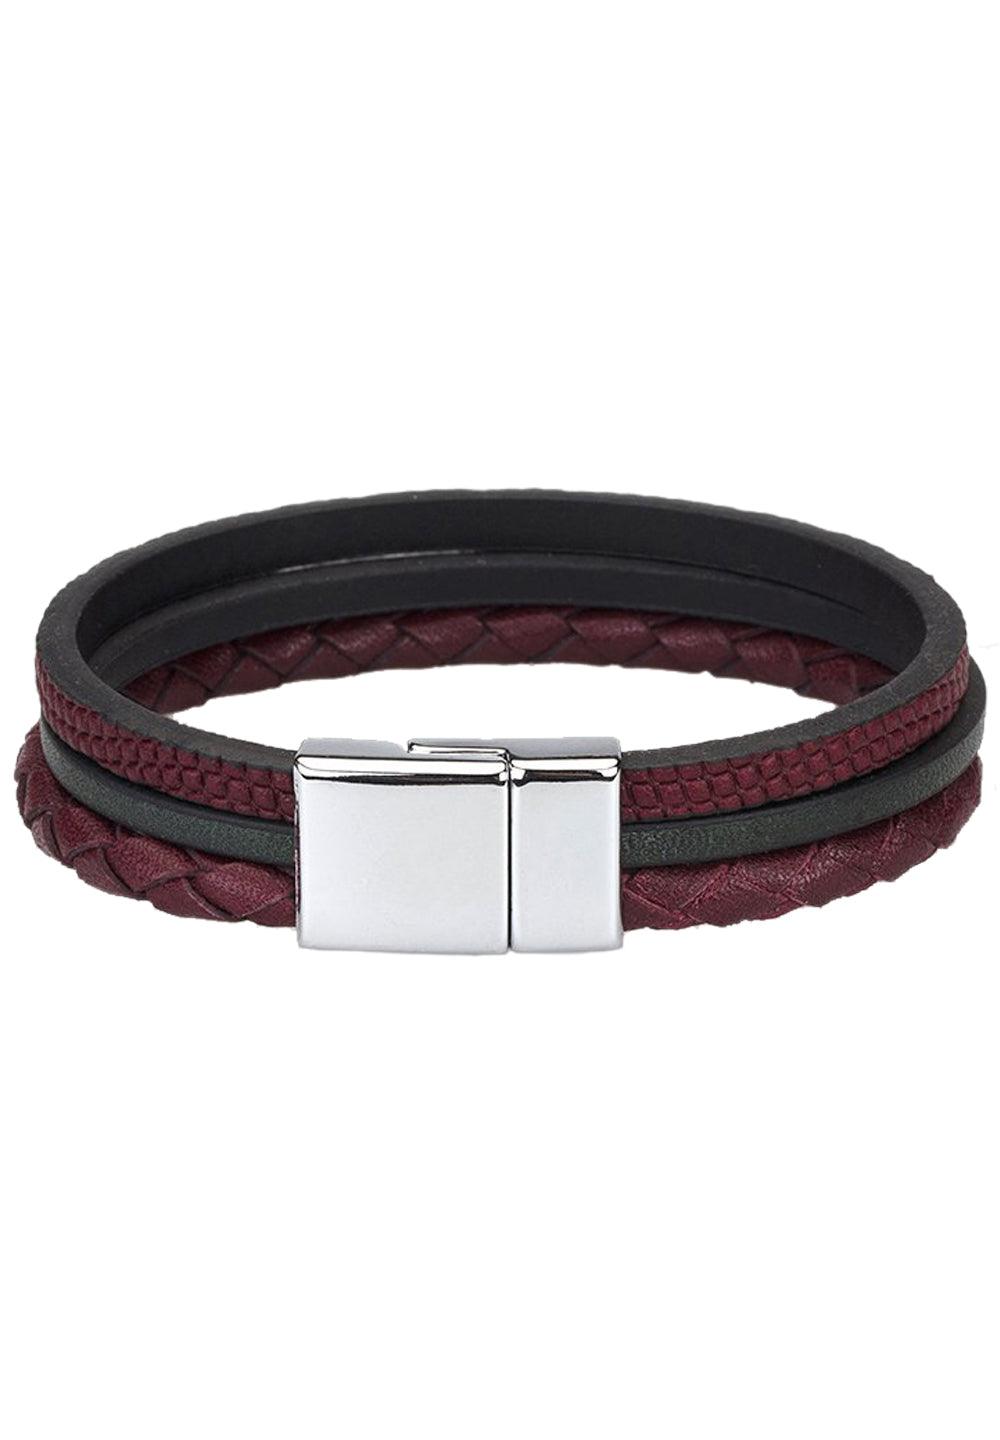 Inspire your dressed up lifestyle with our Italian designed bracelets.    Classic soft leather bands. 3 different straps for an enhanced look. Accent colored leather for a fashion statement. Chrome magnetic closure.